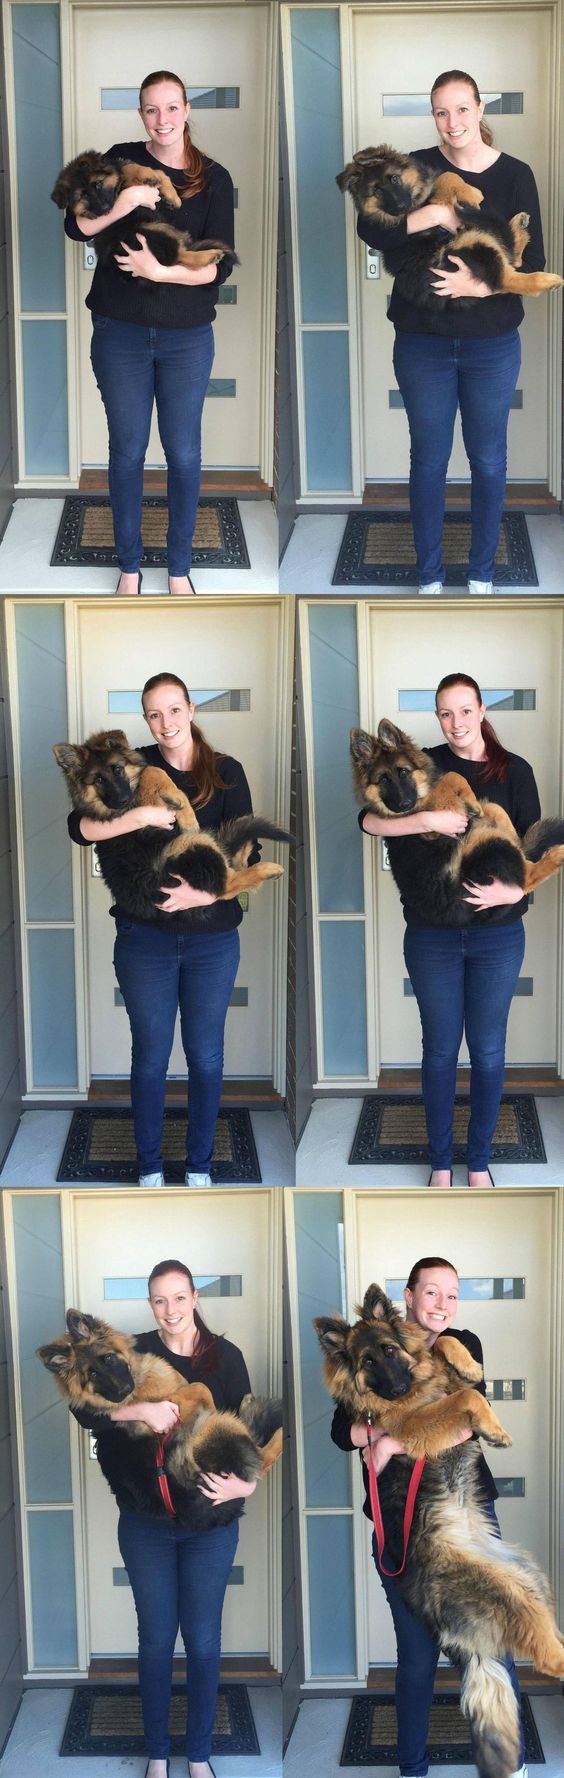 Look at this incredible series of photos from proud pet owner Ashley Lewis, showing what time and love does to a dog. In only 6 months, her lil' 8-week-old German shepherd blossomed from a wee puppy who could easily fit her arms to a hulking big puppy who probably has trouble fitting on the couch.